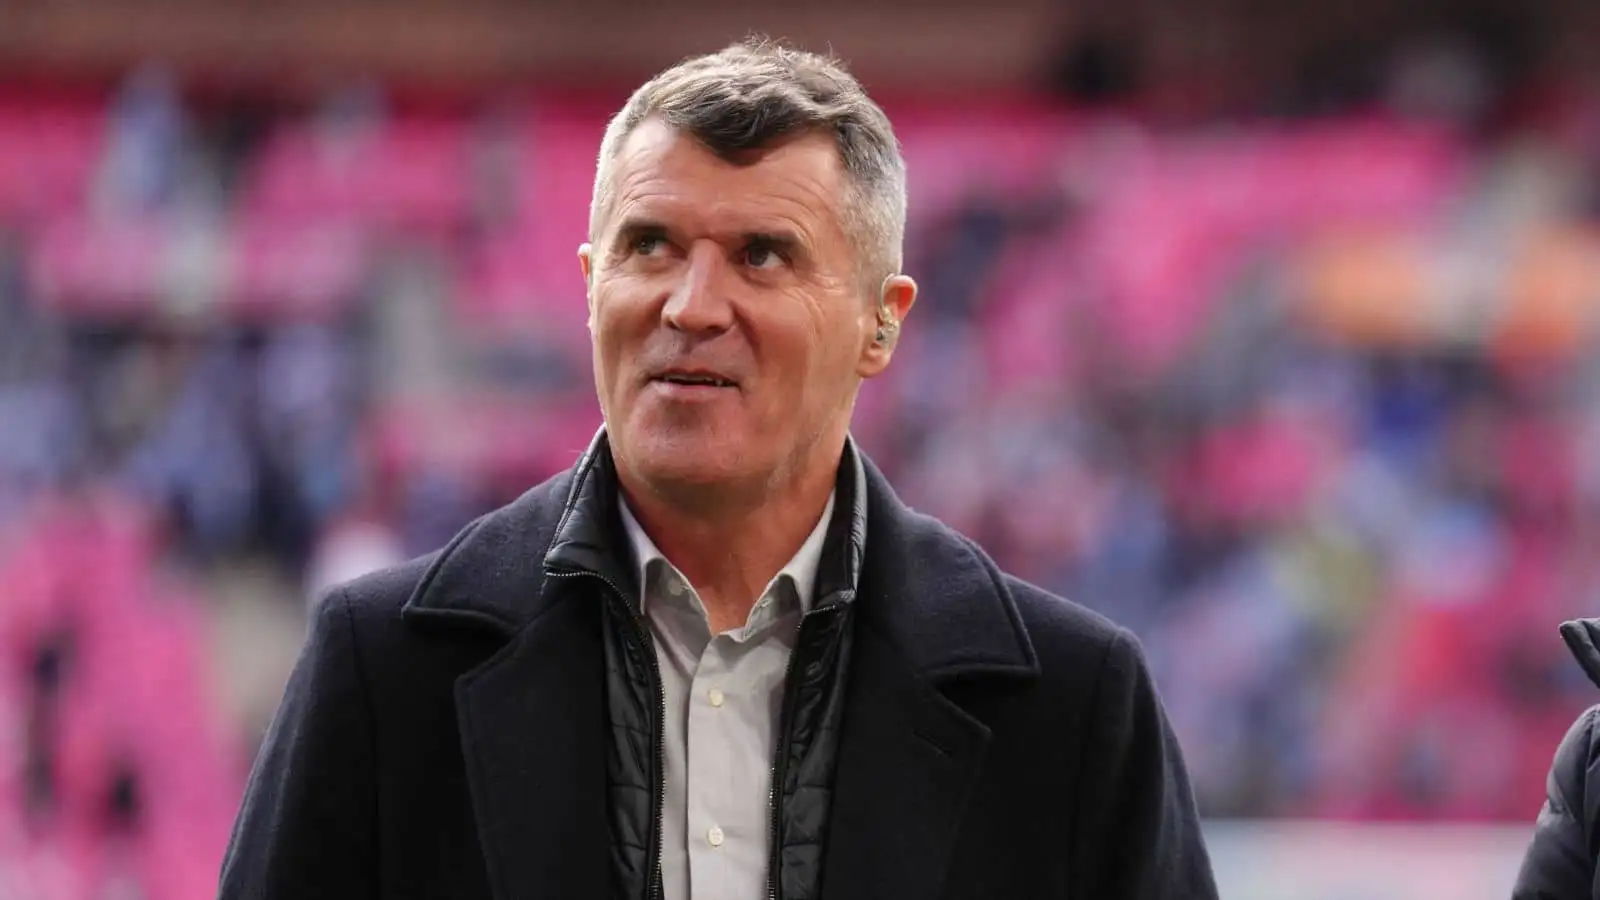 Roy Keane Sky Sports pundit at Wembley ahead of Carabao Cup final